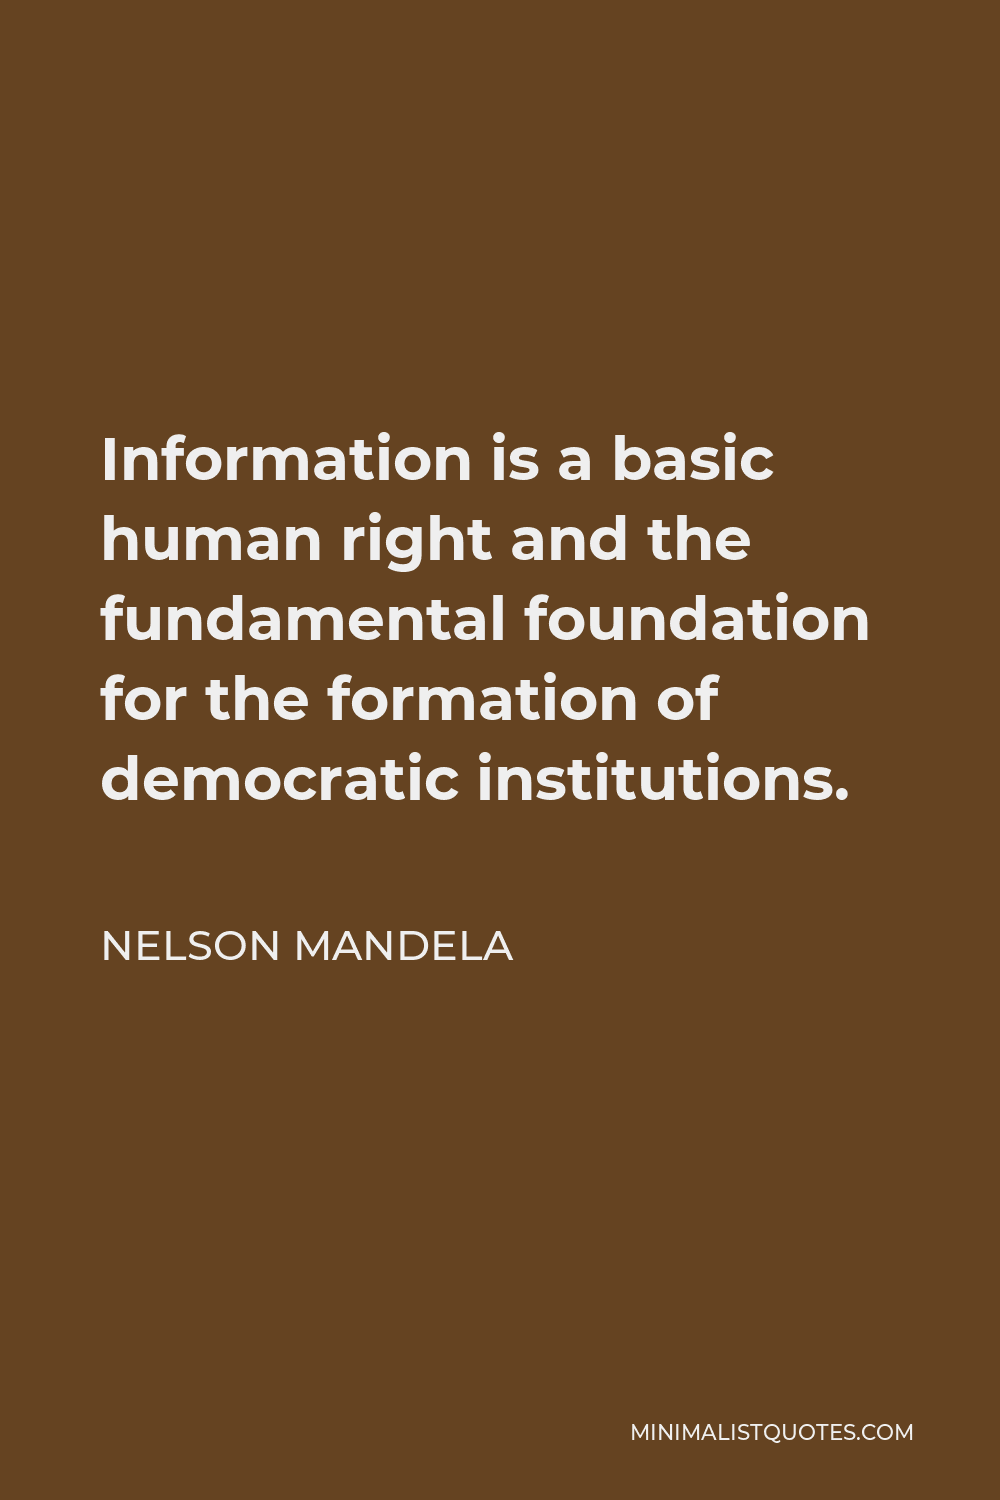 Nelson Mandela Quote - Information is a basic human right and the fundamental foundation for the formation of democratic institutions.